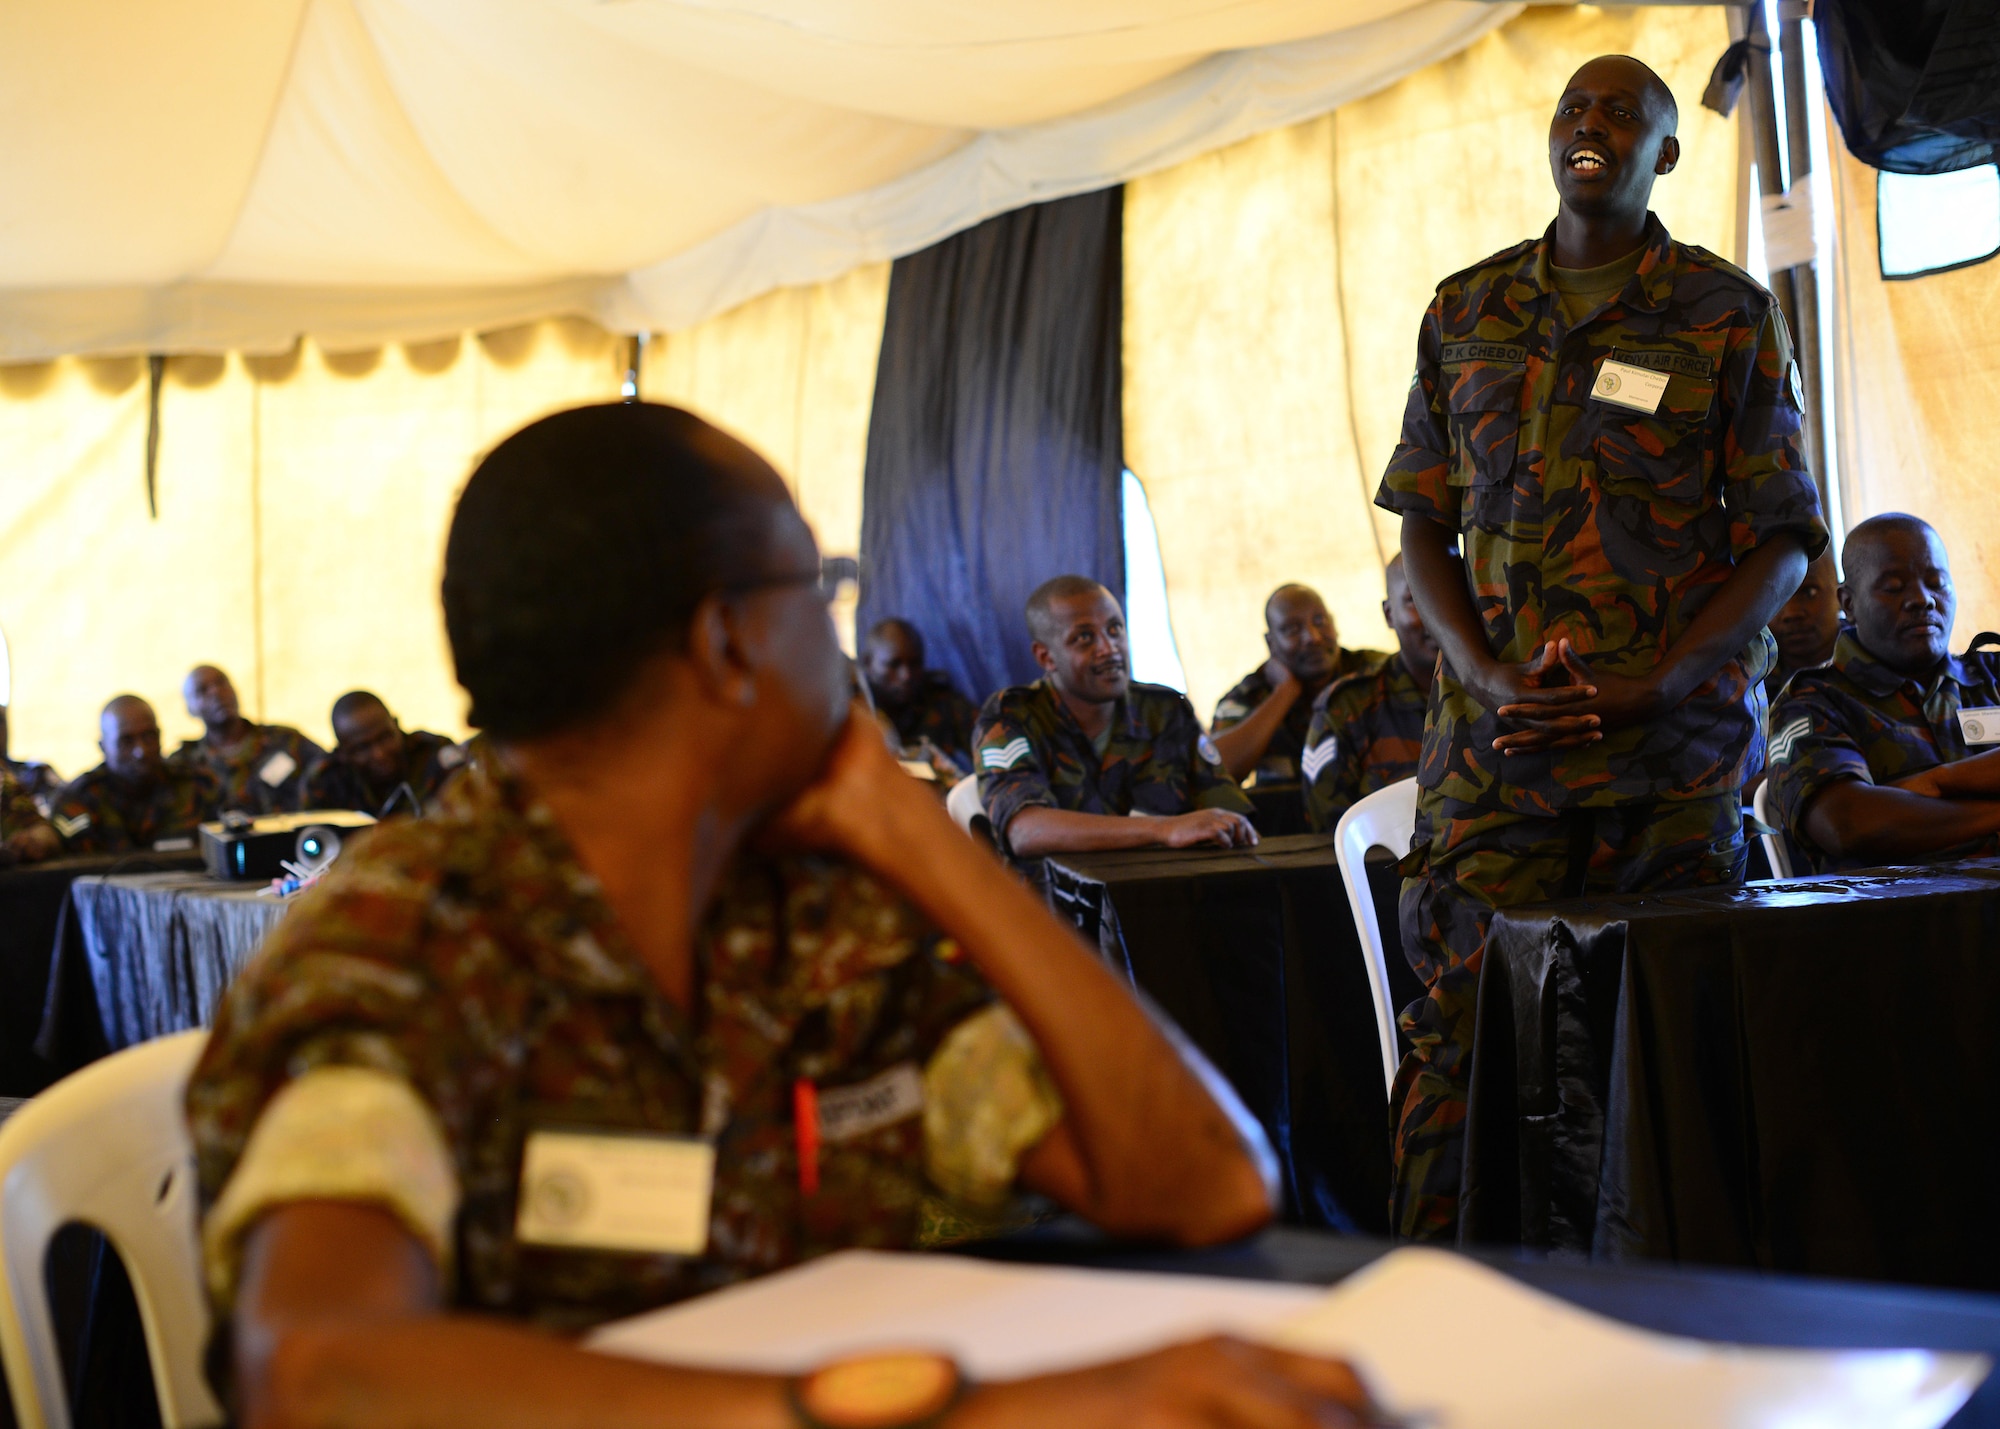 A Kenyan airman introduces himself during classroom training for African Partnership Flight Kenya at Laikipia Air Base, Kenya, June 20, 2016. More than 50 U.S. Air Force Airmen participated in the first African Partnership Flight in Kenya. The APF is designed for U.S. and African partner nations to work together in a learning environment to help build expertise and professional knowledge and skills. (U.S. Air Force photo by Tech. Sgt. Evelyn Chavez/Released)